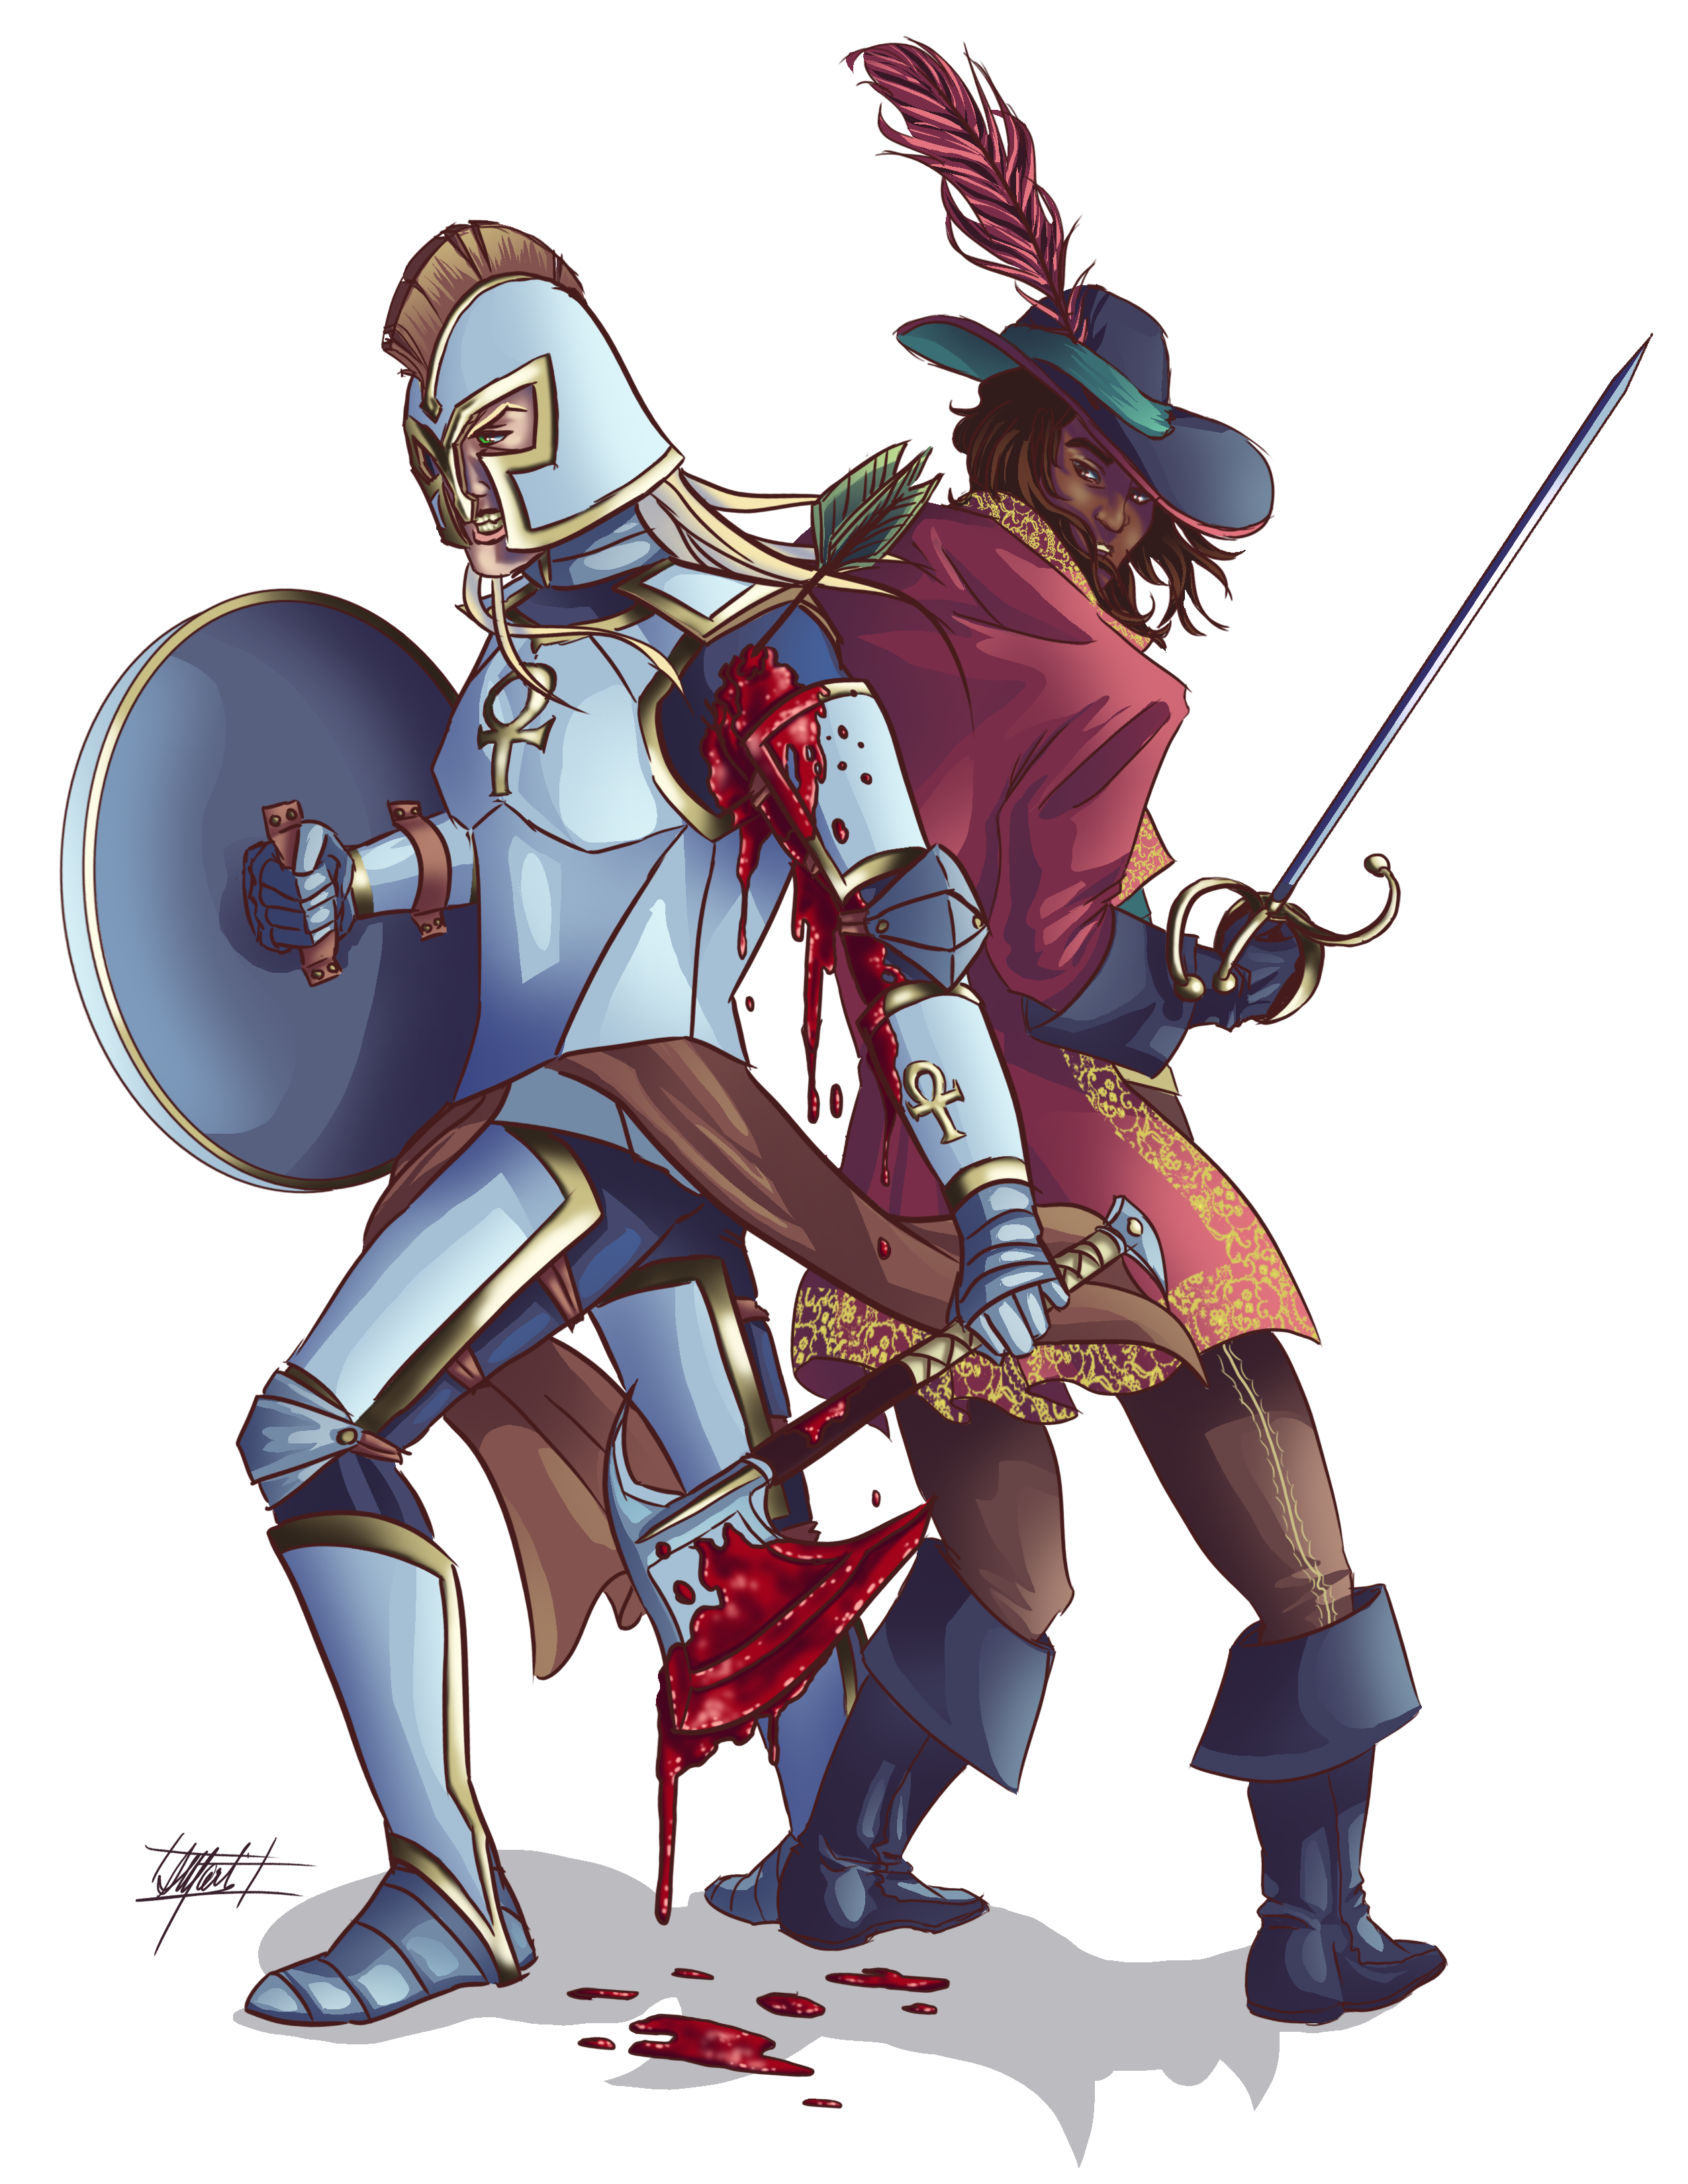 knight clipart nobleman